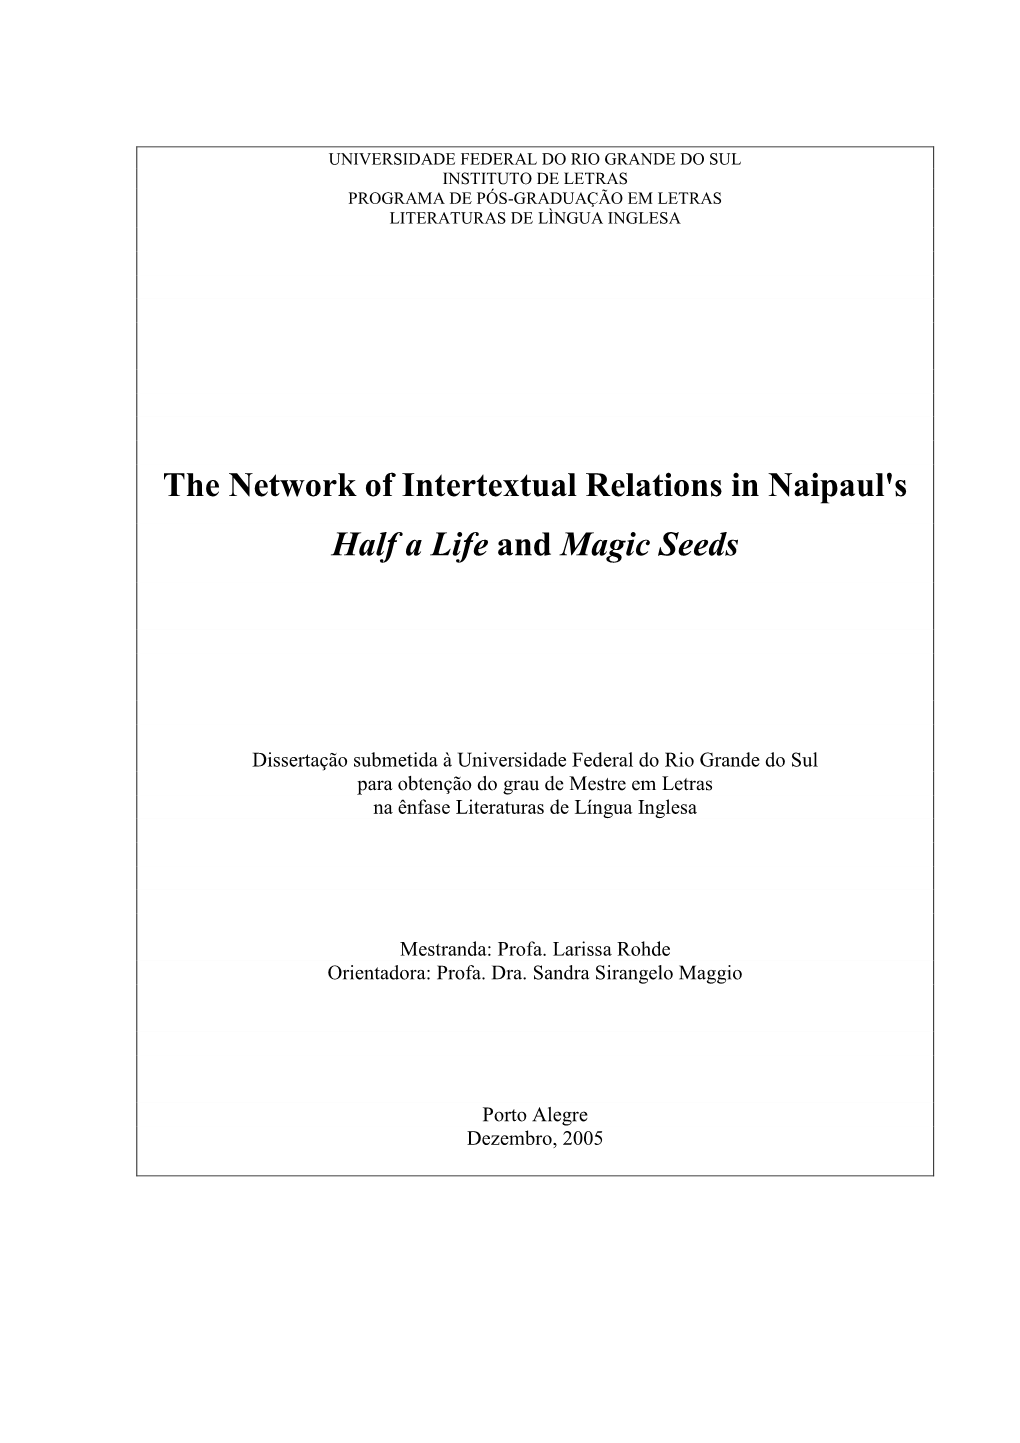 The Network of Intertextual Relations in Naipaul's Half a Life and Magic Seeds